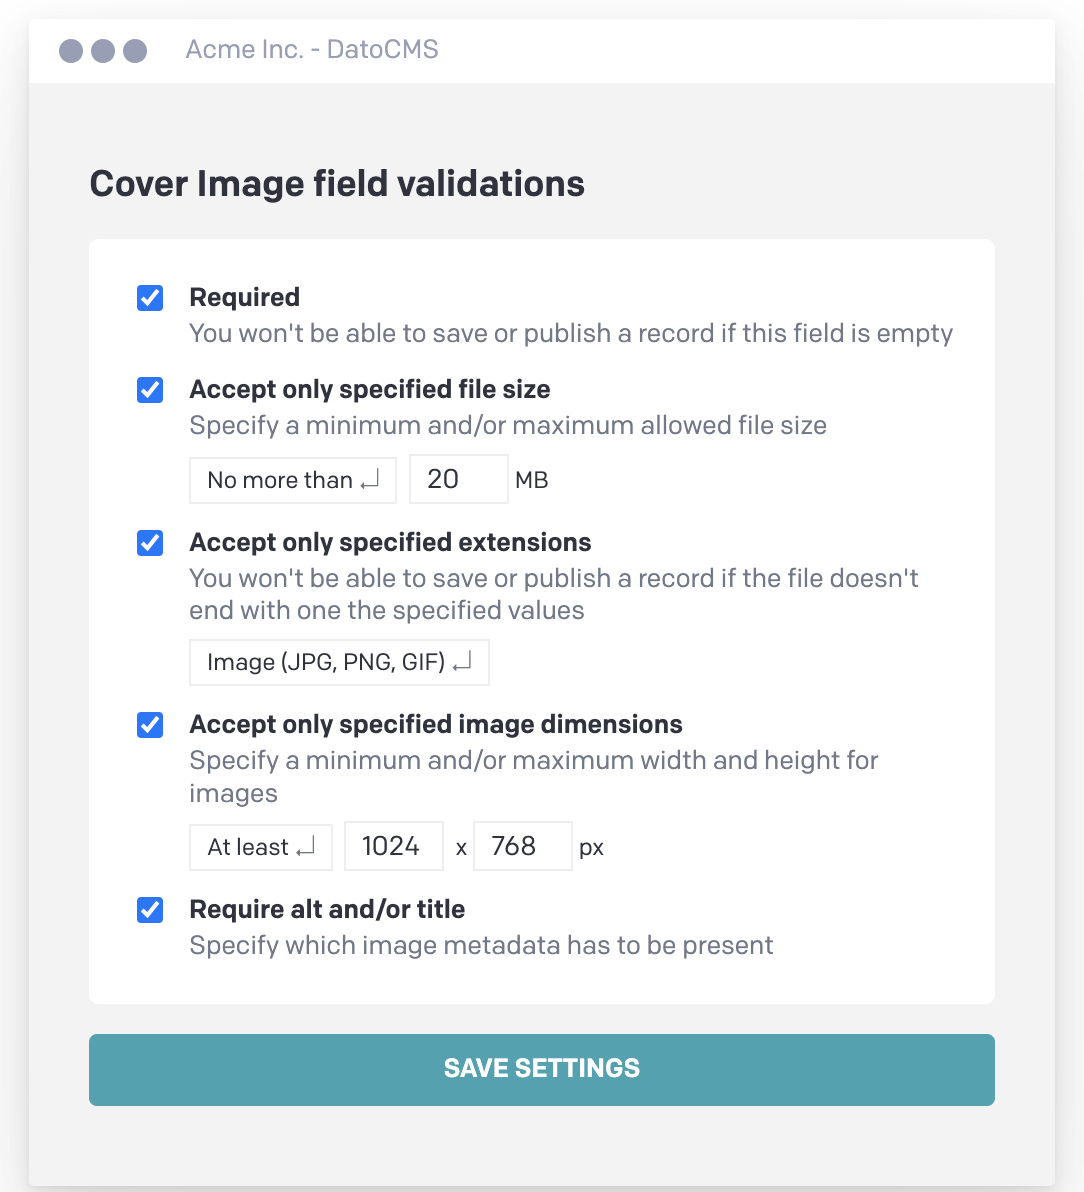 Field validations for clean content at every stage